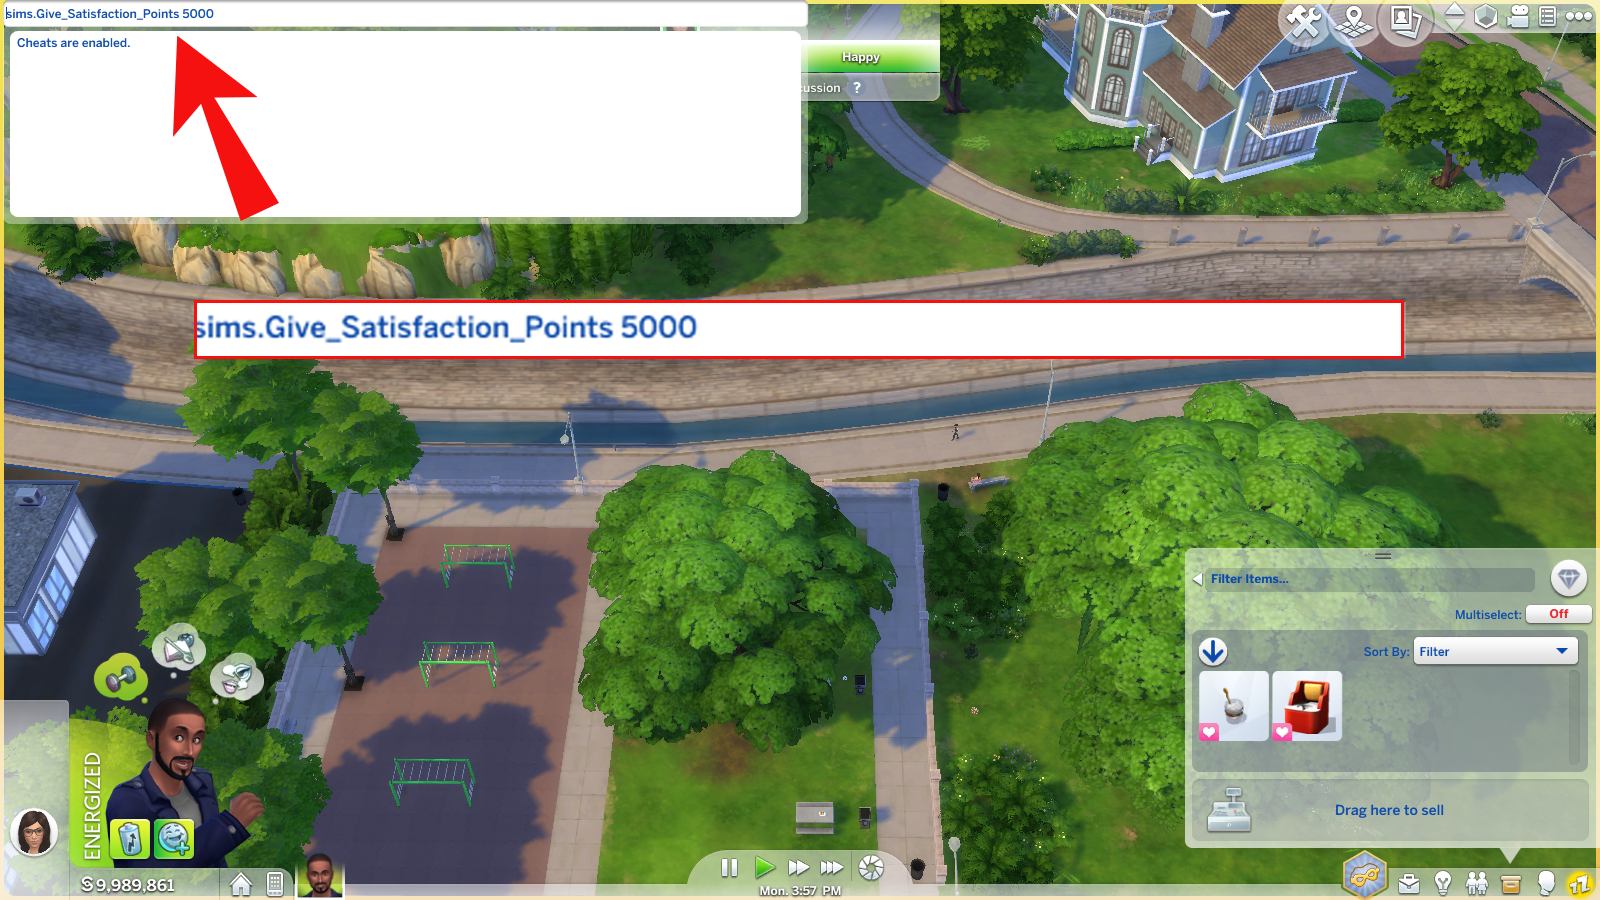 How to edit Sims in The Sims 4